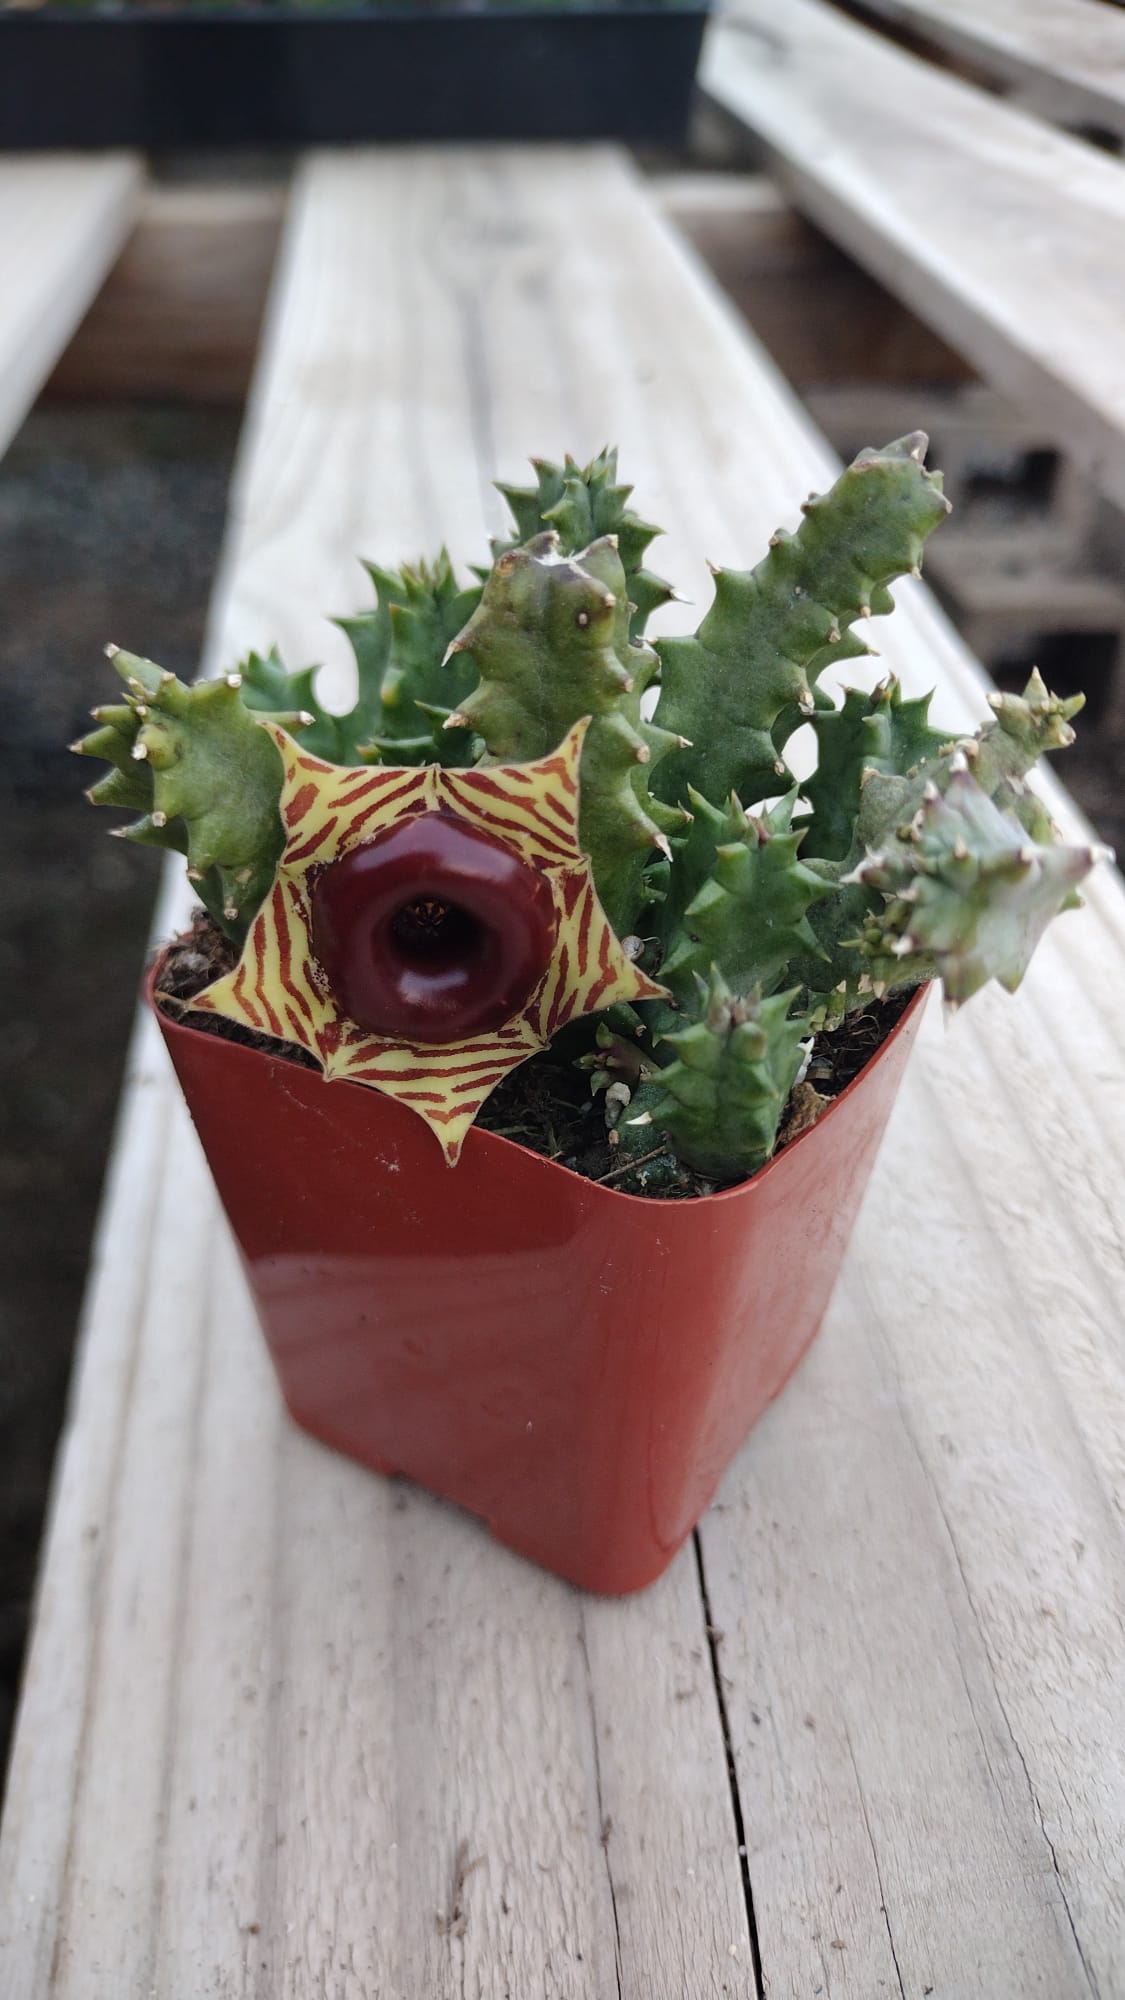 #102 Huernia zebrina "Lifesaver Plant"-Succulent - Small - Exact 2in Type-The Succulent Source